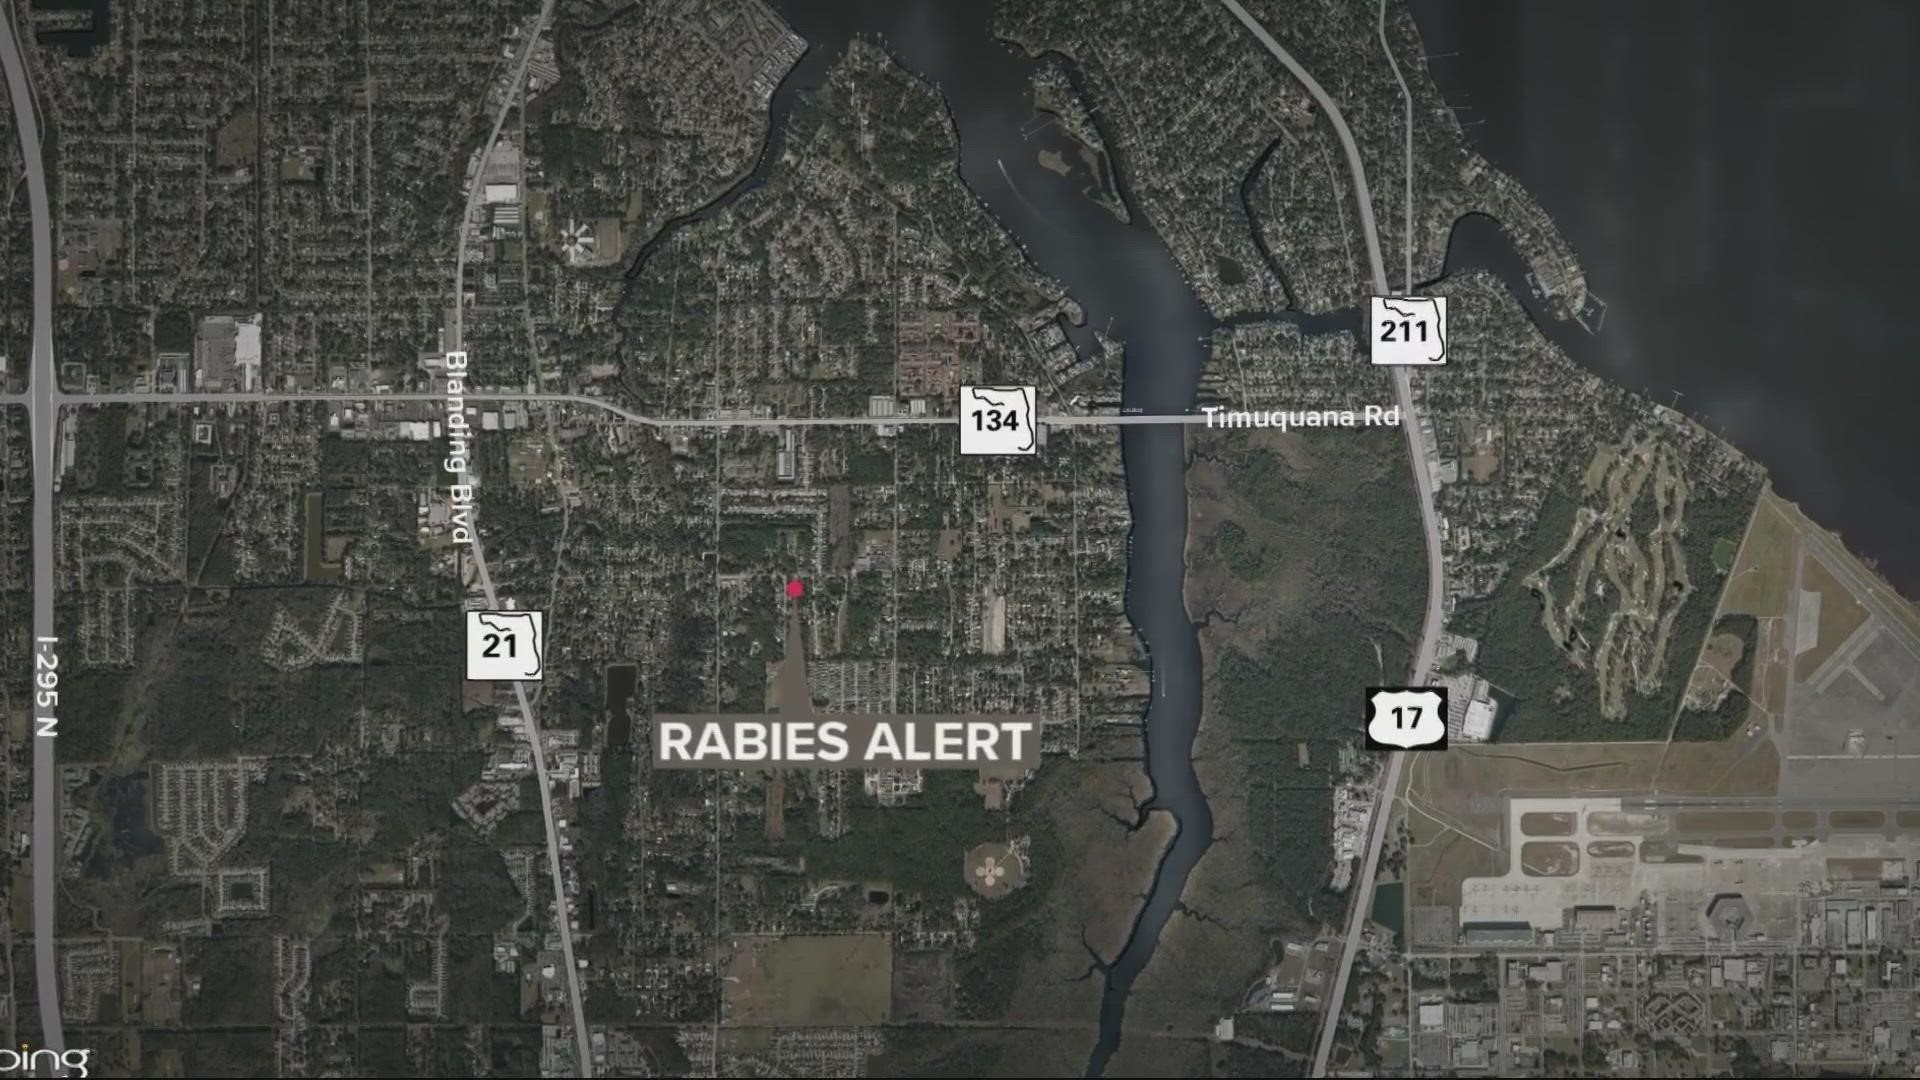 The alert follows discovery of a rabid raccoon in the Wesconnett neighborhood, according to the Florida Department of Health in Duval County.